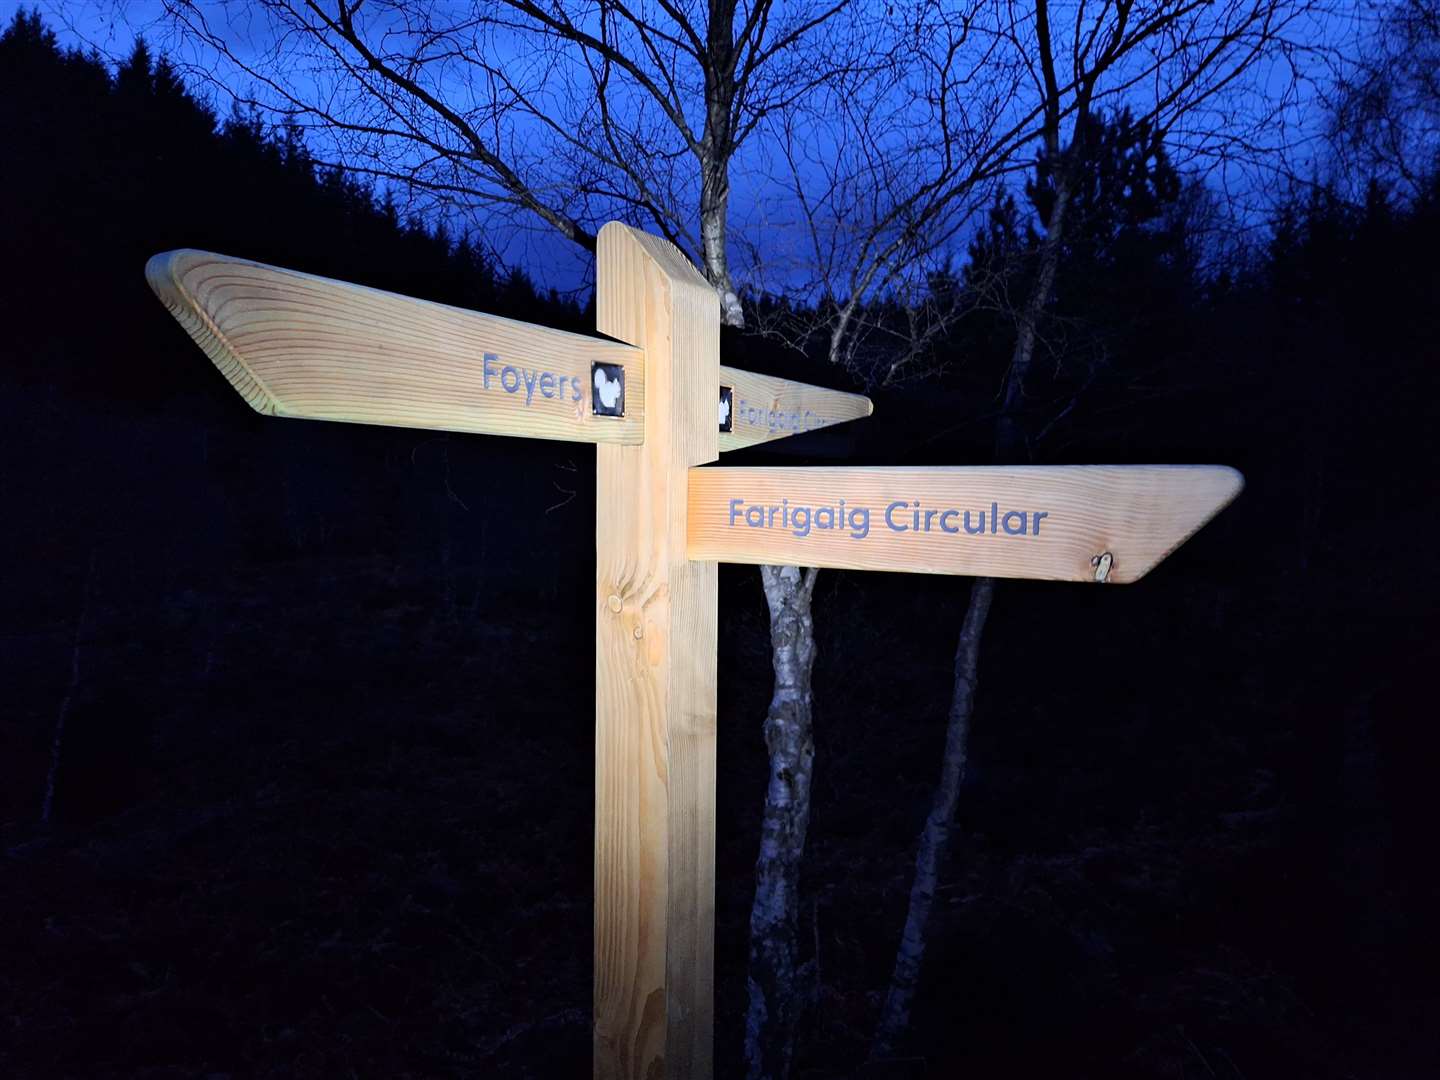 A new fingerpost for the Farigaig Circular route.